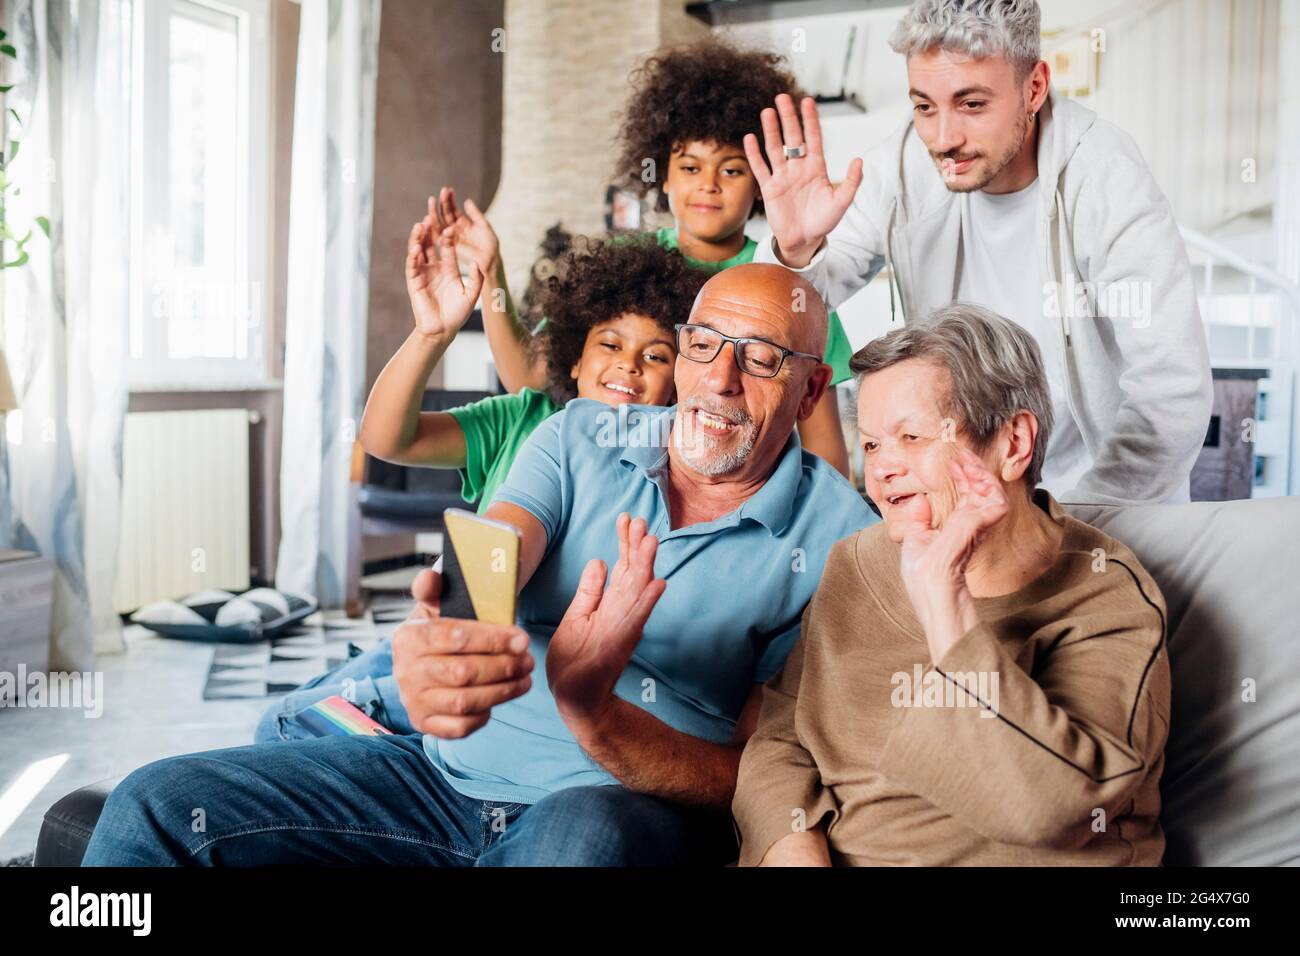 Multiethnic family waving hands together while doing video call through smart phone at home Stock Photo